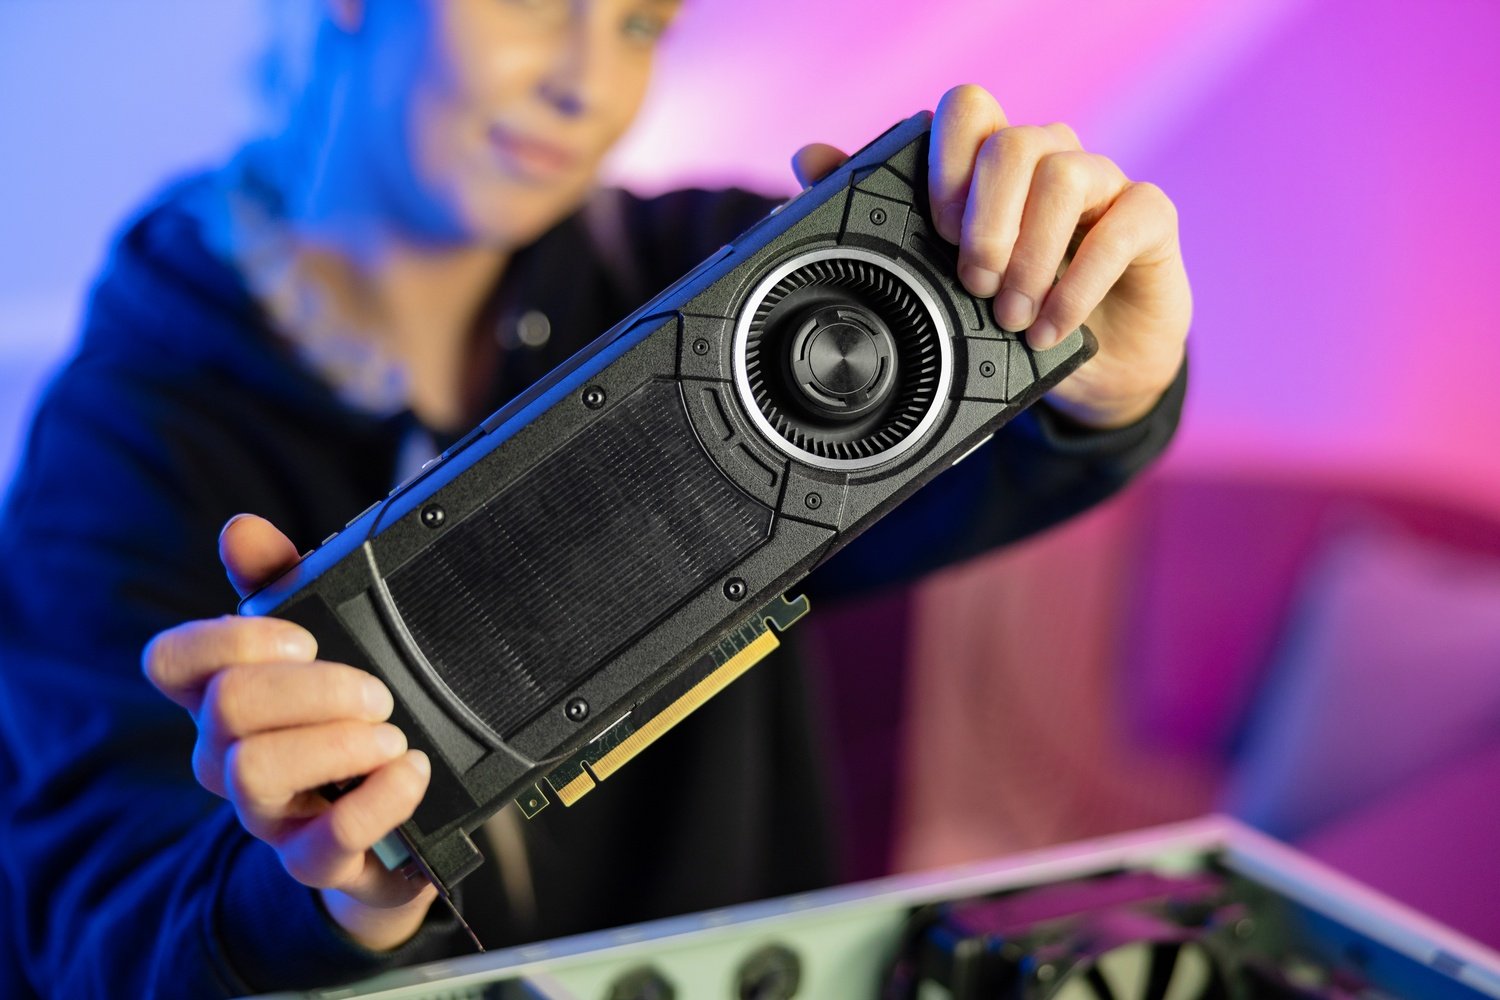 Gamer Girl Holding a New GPU Video Card in Her Hands